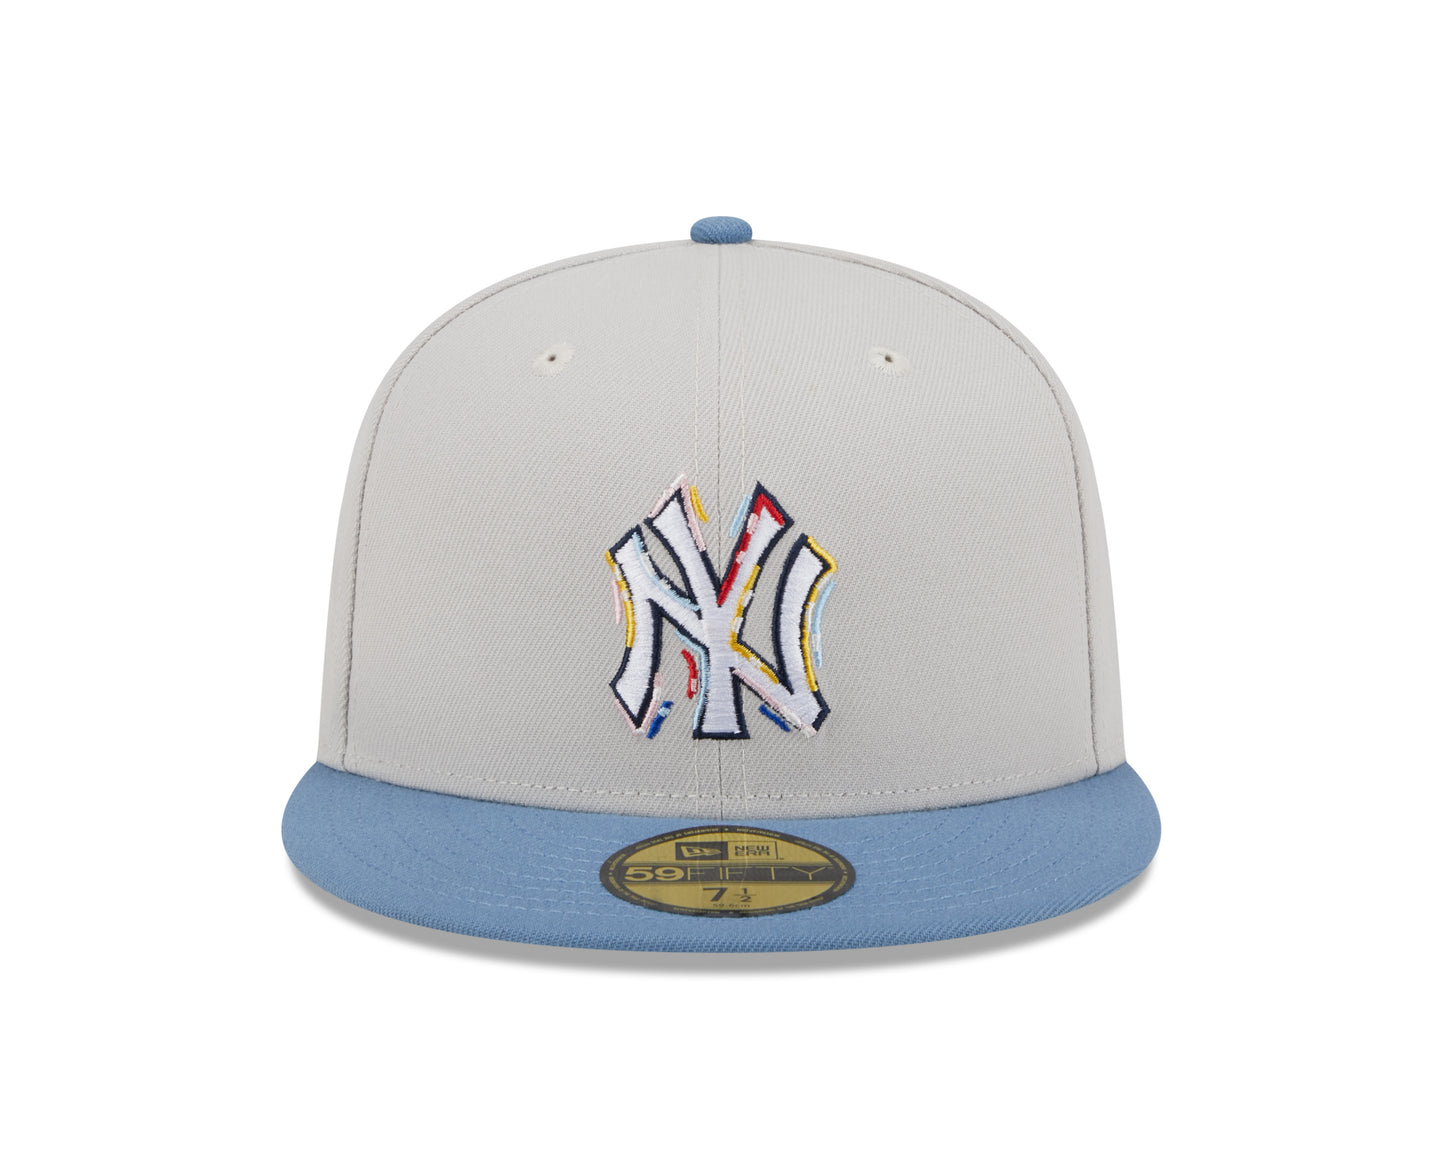 New Era - COLOR BRUSH - 59fifty Fitted Cap - New York Yankees - Stone - Headz Up 